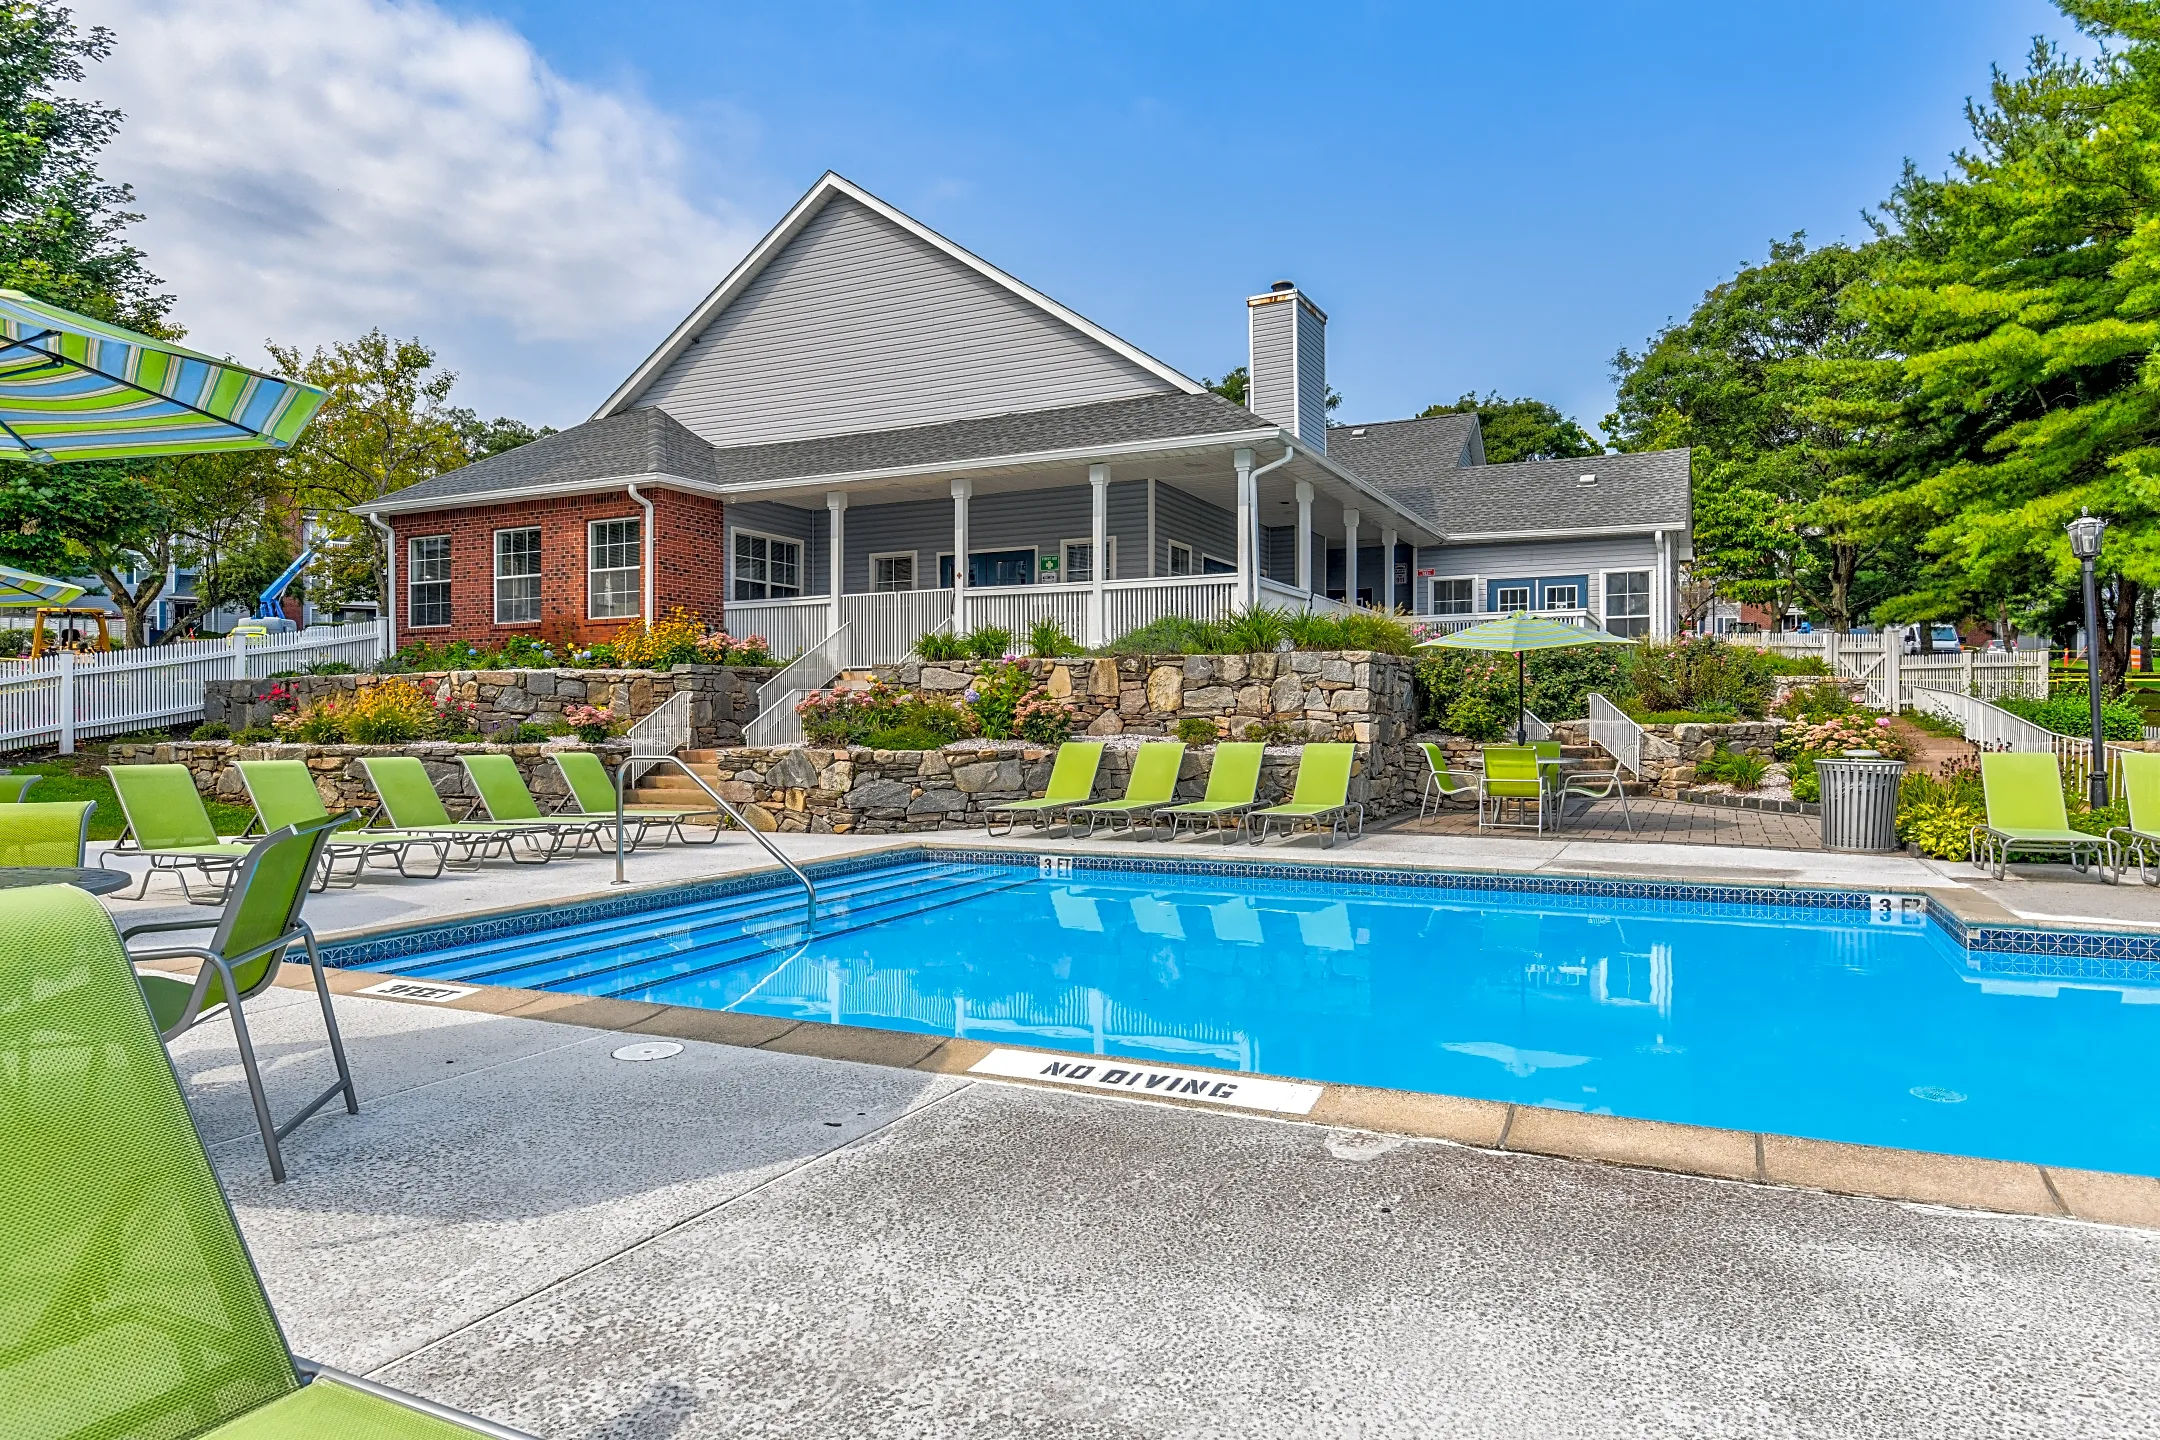 Pool - The Village At Wethersfield - Wethersfield, CT